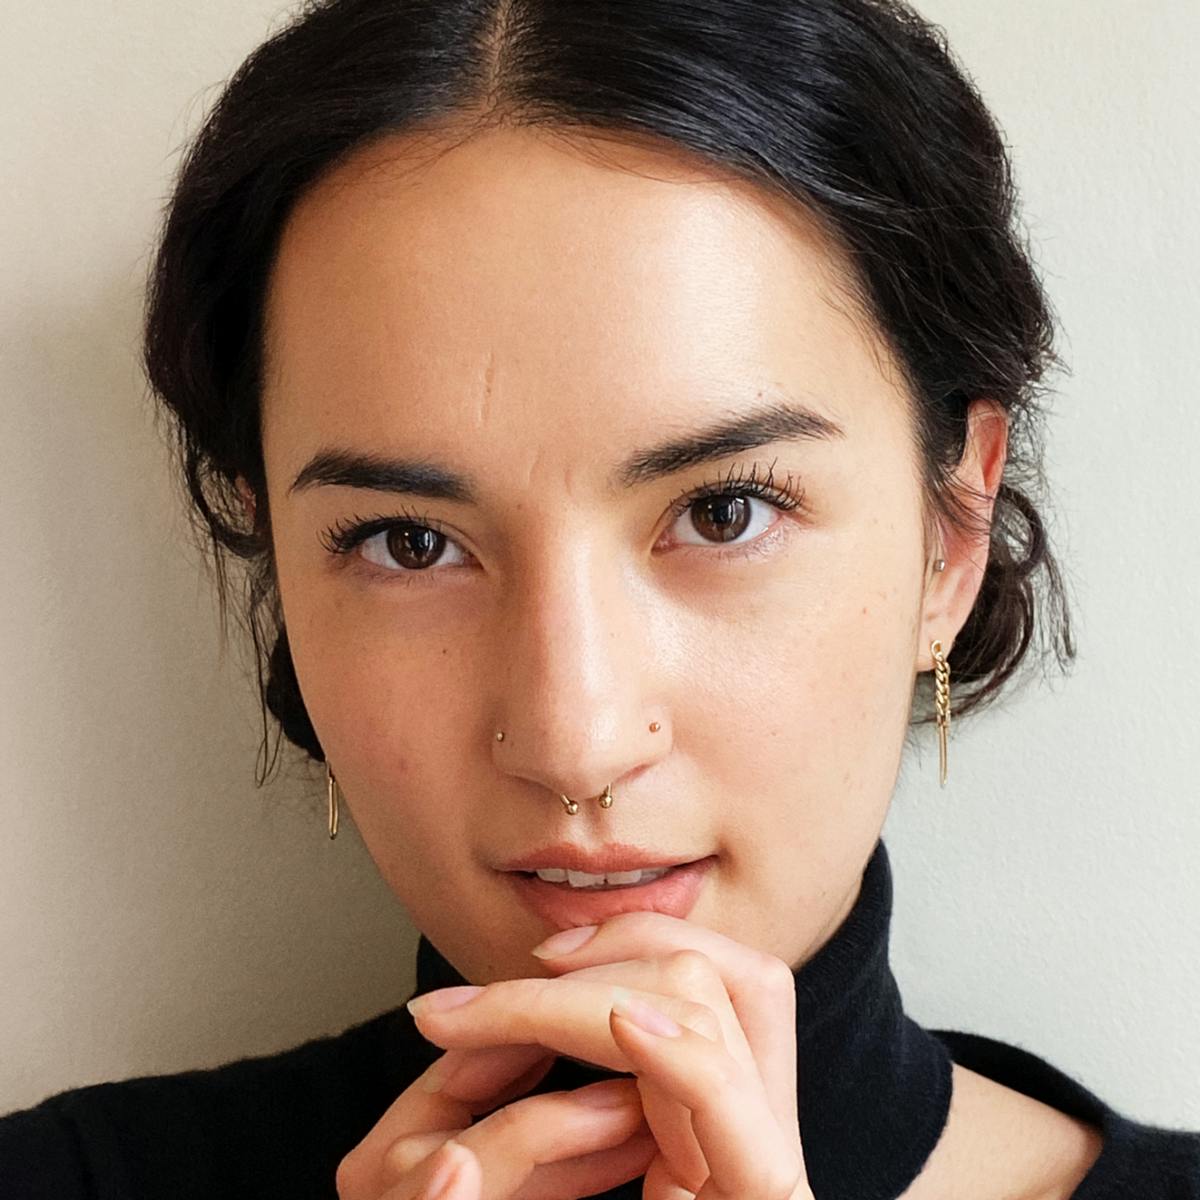 Jessie Mei Li wears a black turtleneck baring a strip of skin. She wears gold earrings, a few nose rings, and holds her hands beneath her mouth.